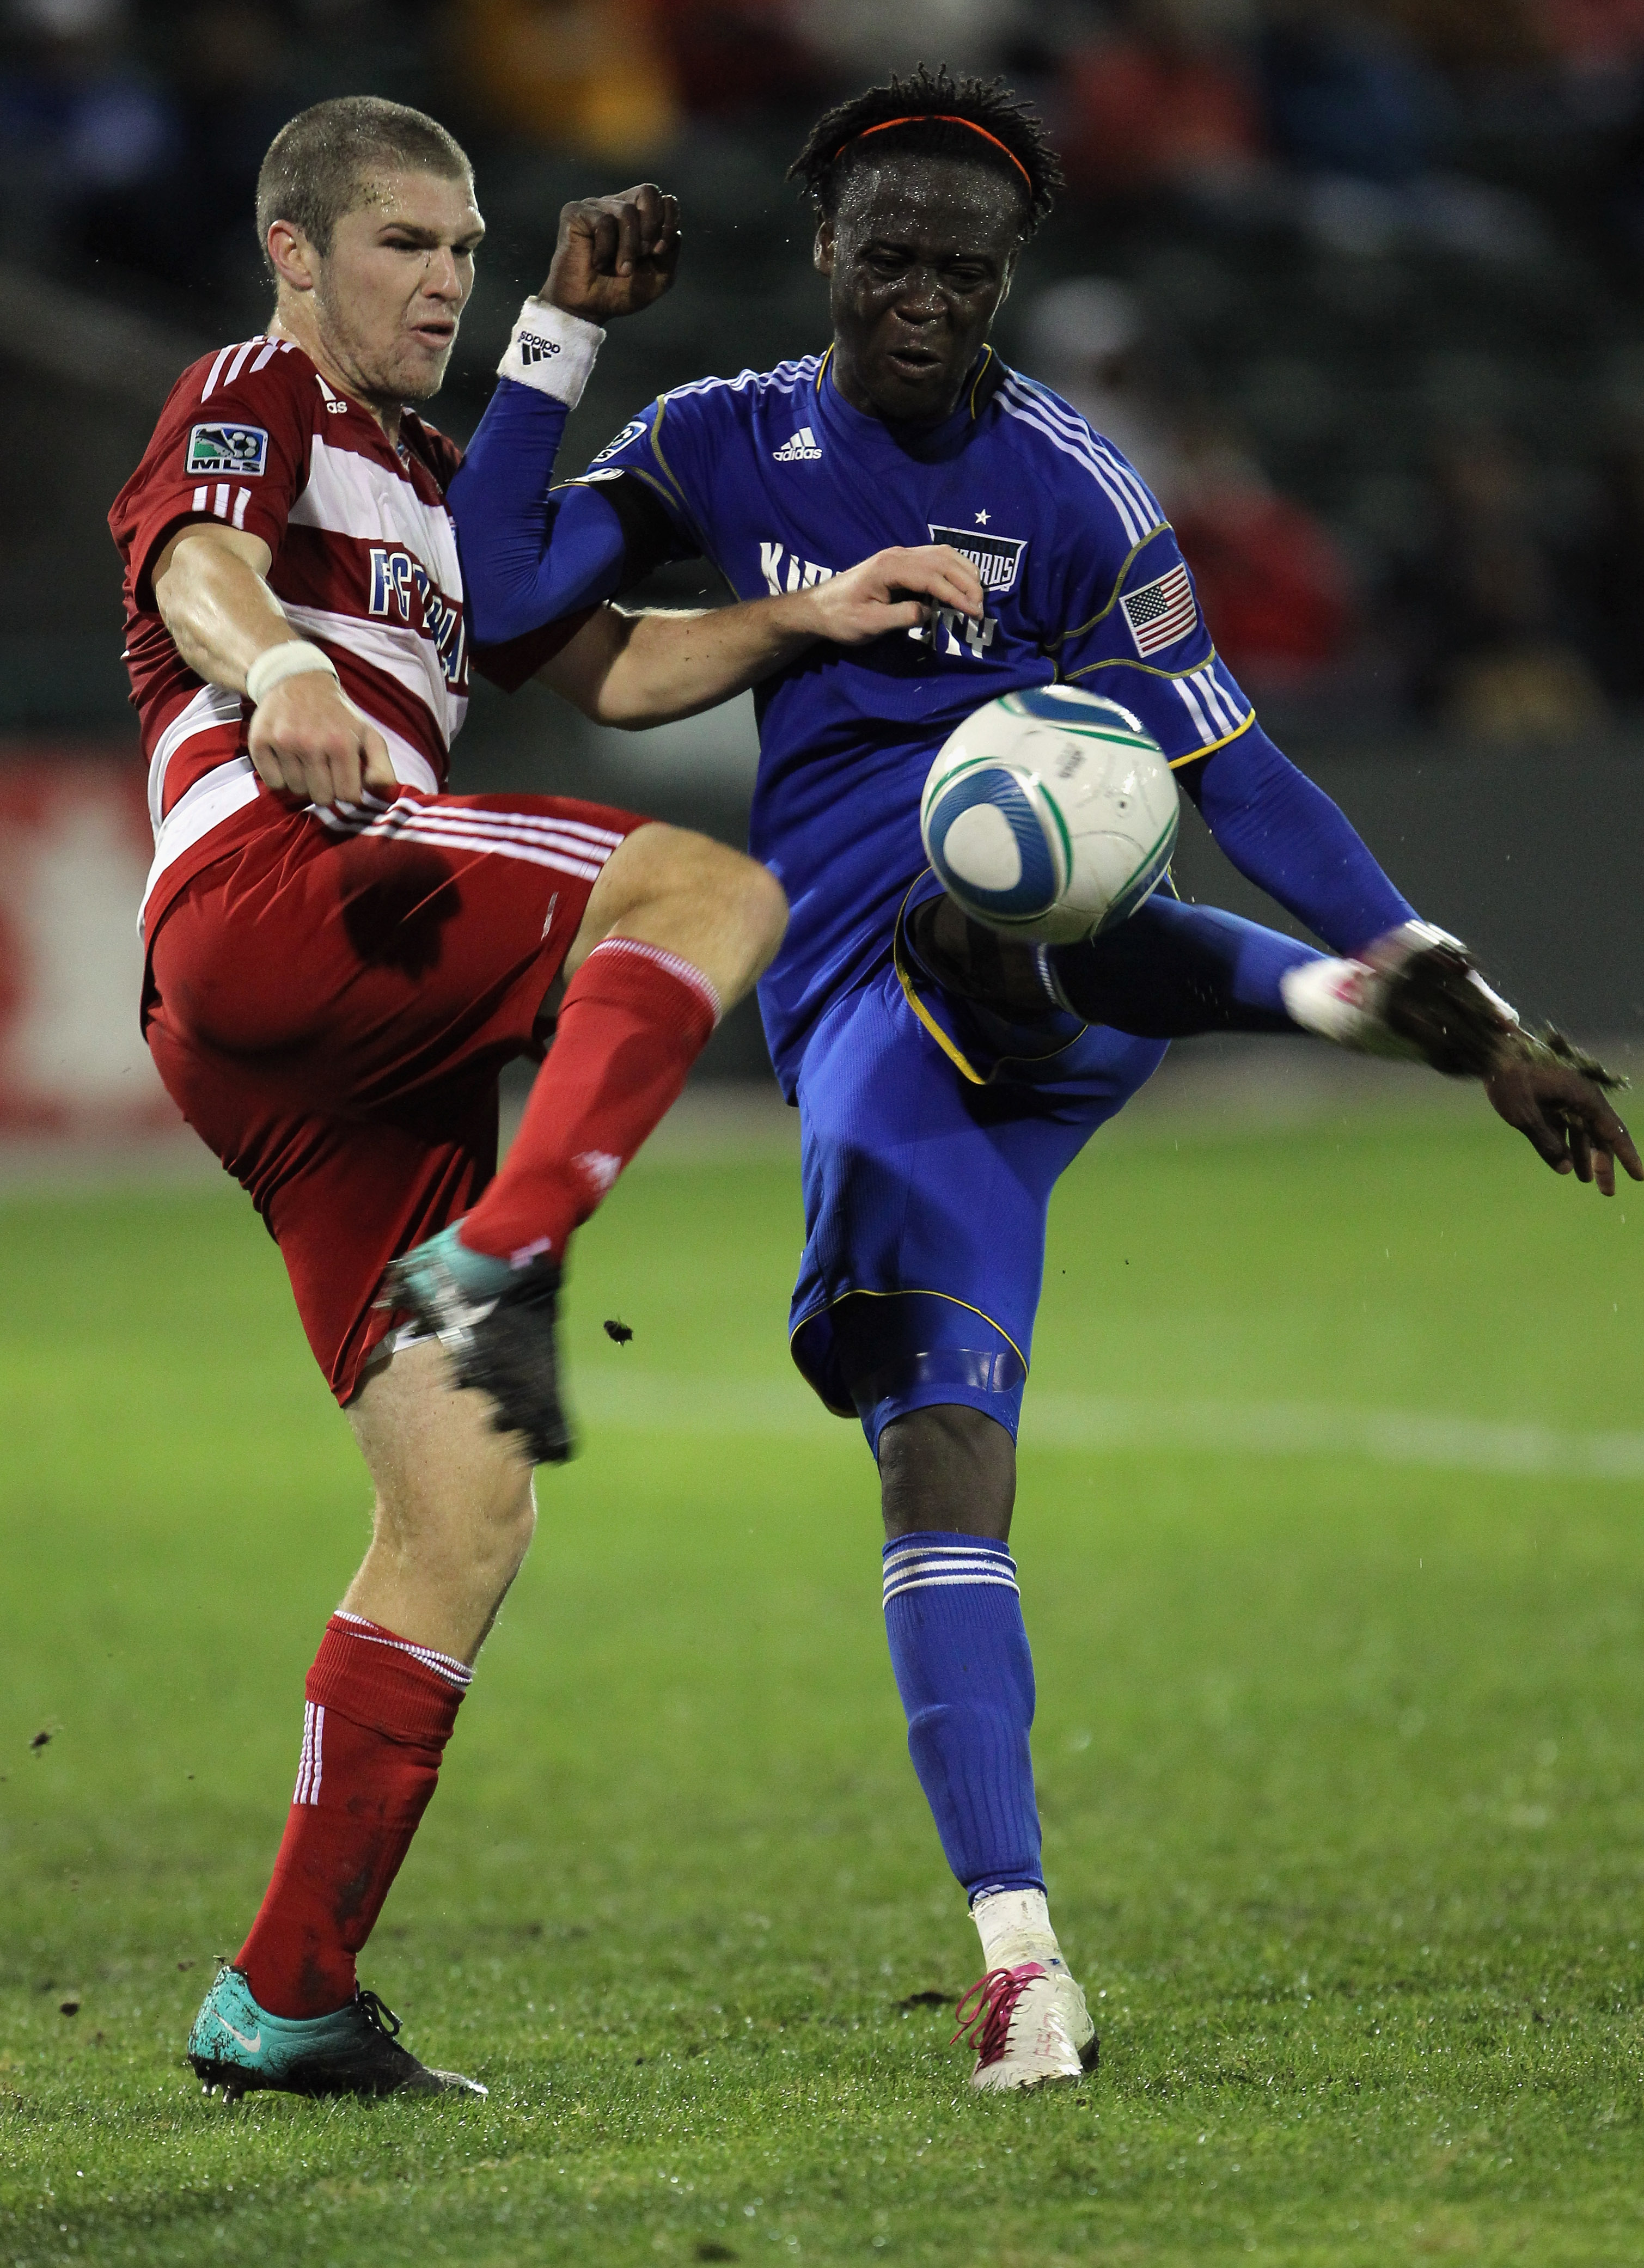 KANSAS CITY, MO - SEPTEMBER 25:  Kei Kamara #23 of the Kansas City Wizards shoots as Kyle Davies #15 of FC Dallas defends during the game on September 25, 2010 at Community America Ballpark in Kansas City, Missouri.  (Photo by Jamie Squire/Getty Images)